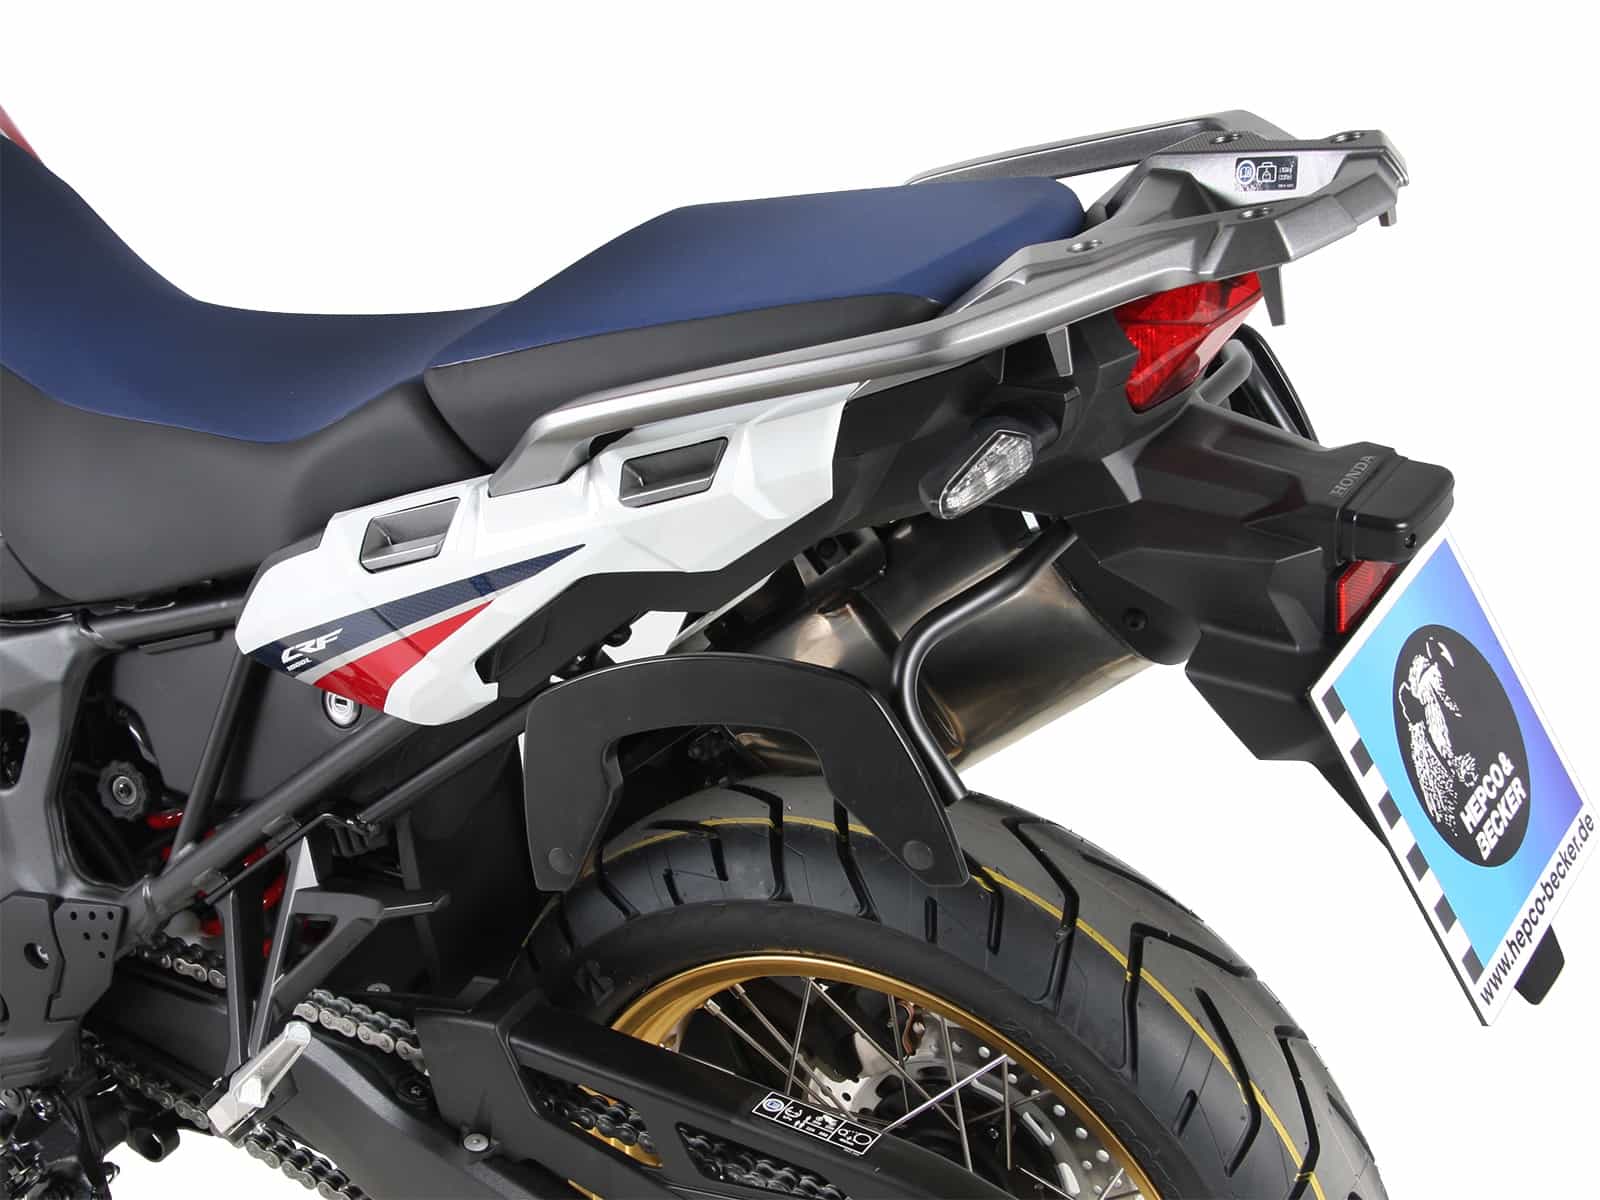 C-Bow sidecarrier black for Honda CRF1000L Africa Twin (2018-2019)